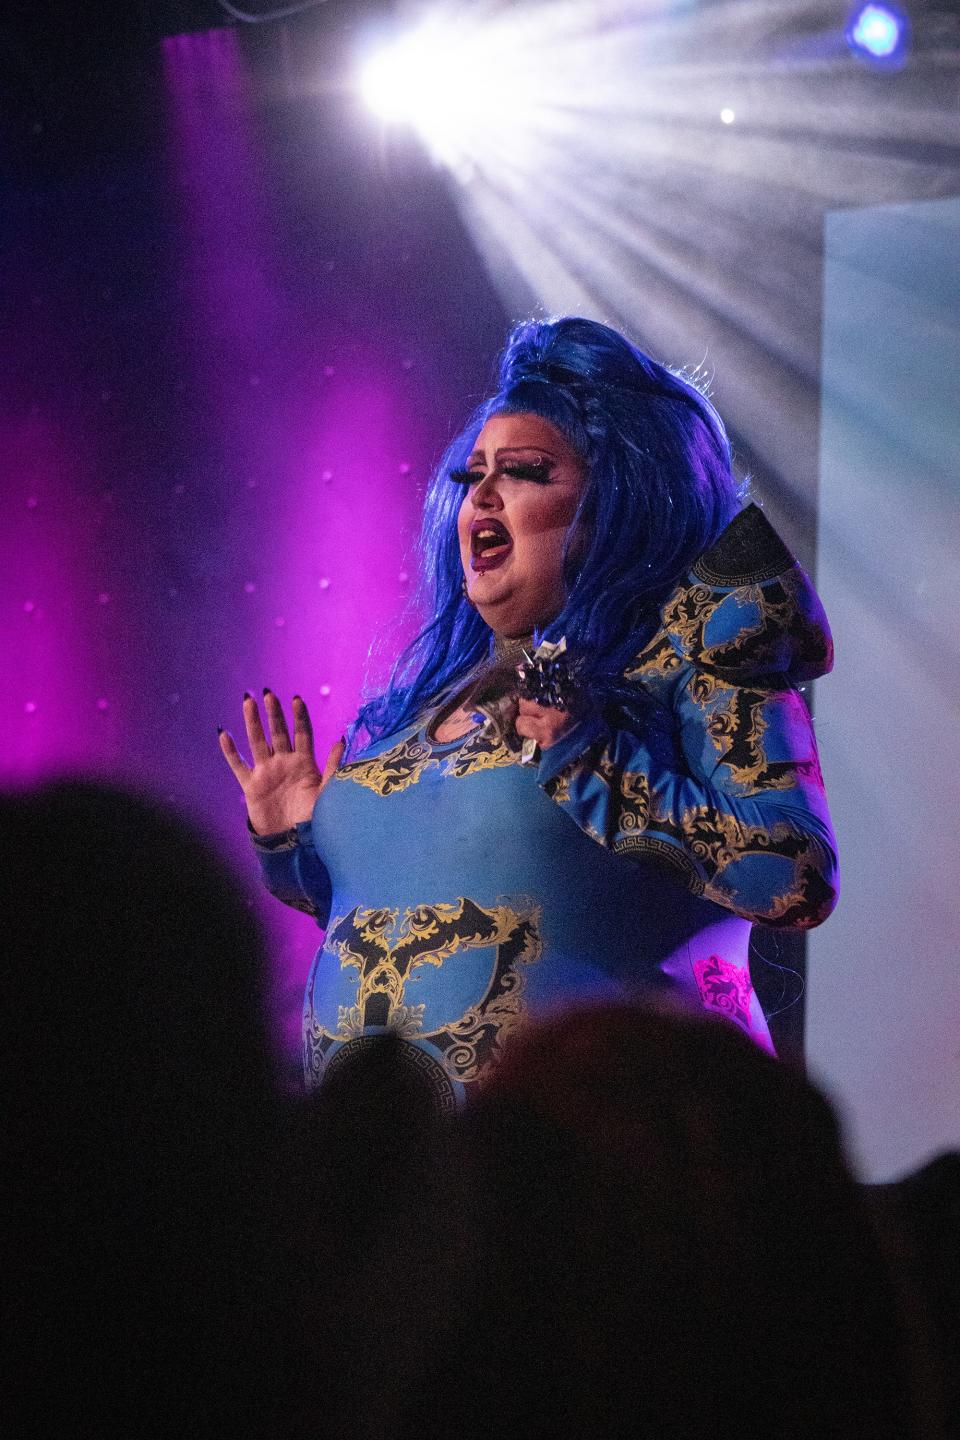 Mia Gunn Mornett "belts" out a line while lip-syncing during her performance at Martha's Vineyard on Friday, Feb. 11, 2022. Mornett has been performing drag for 10 years in Springfield. Today, she both performs as a drag queen on Martha's stage and DJs weekday shows.